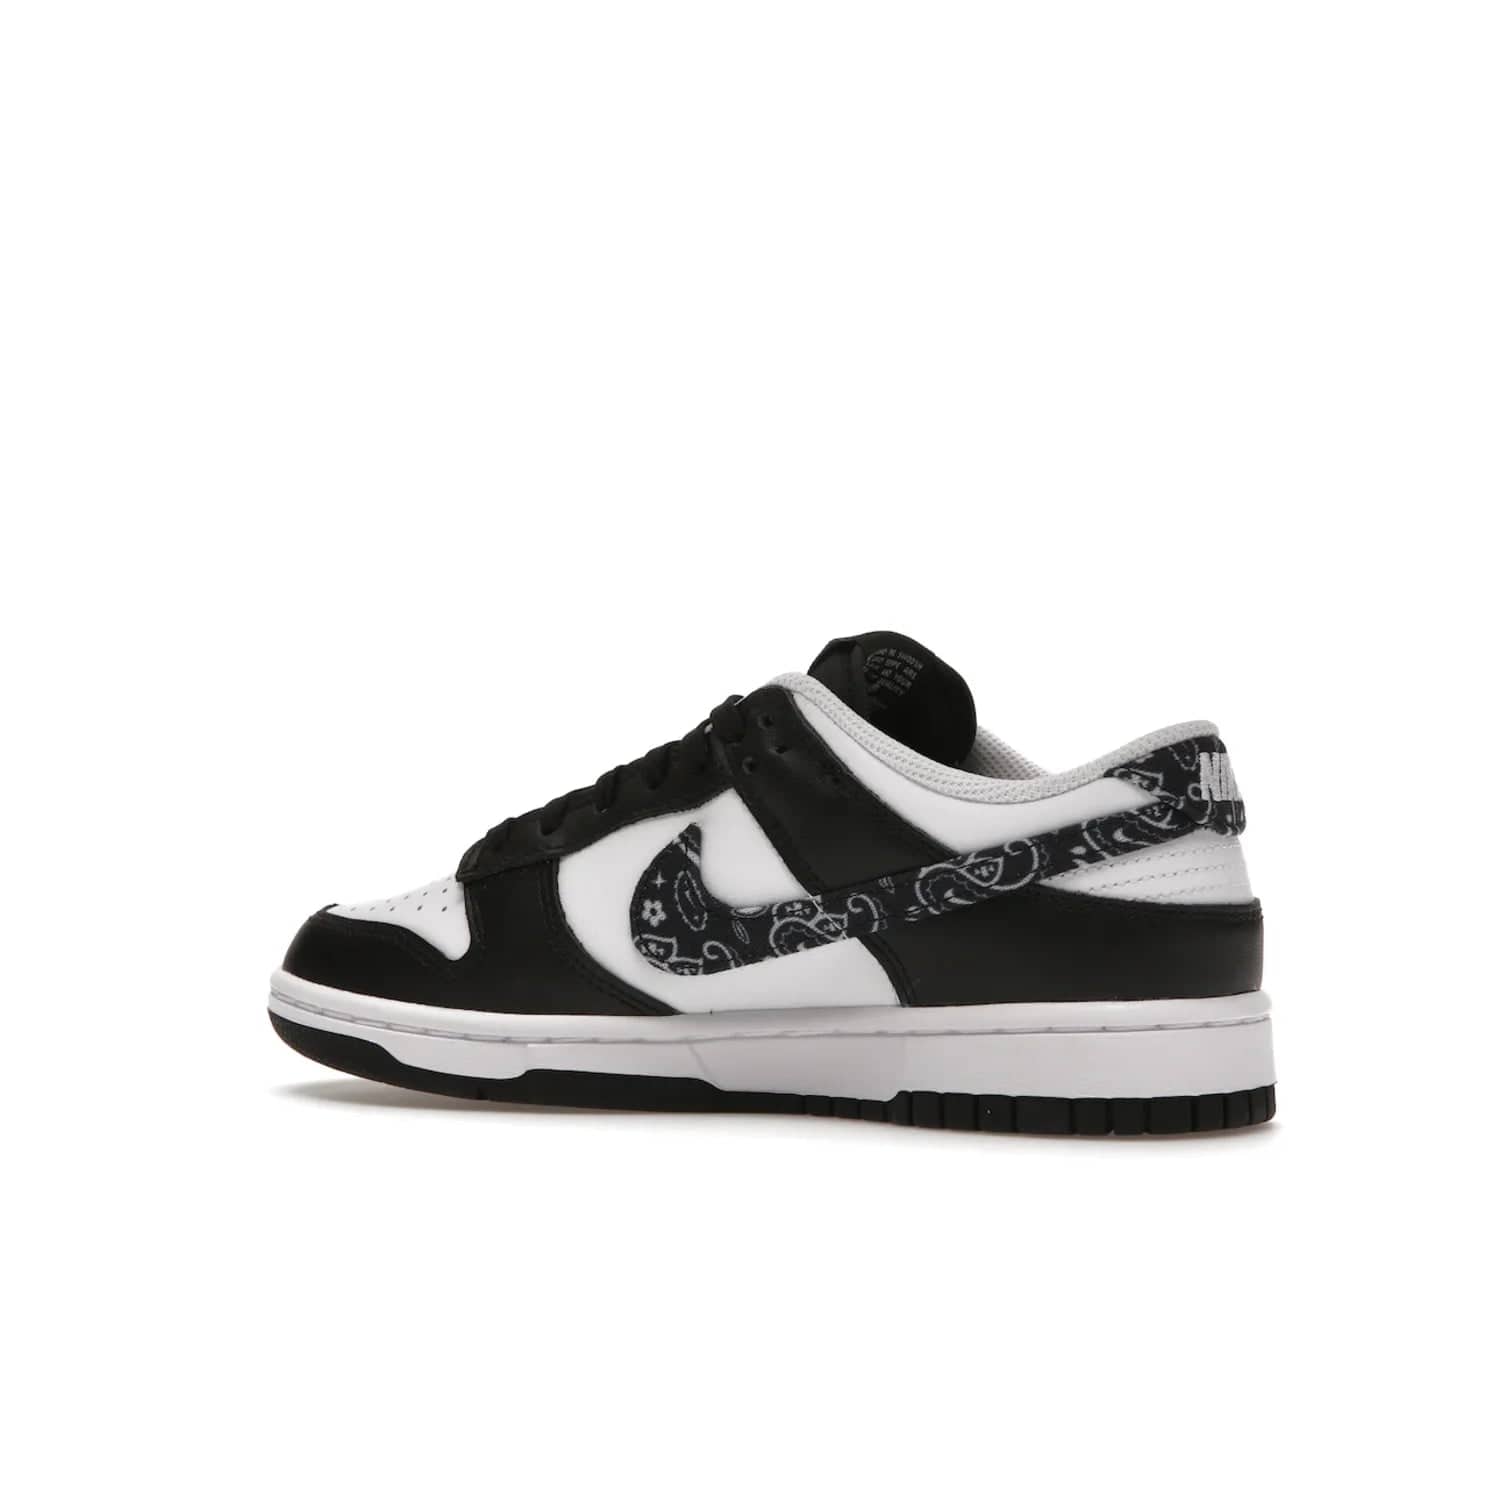 Nike Dunk Low Essential Paisley Pack Black (Women's) - Image 22 - Only at www.BallersClubKickz.com - Make a statement with the all-black Nike Dunk Low Essential Paisley Pack Black (Women's) featuring white leather overlays, a stunning paisley bandana print, and a white midsole for comfort and optimal grip on any surface.